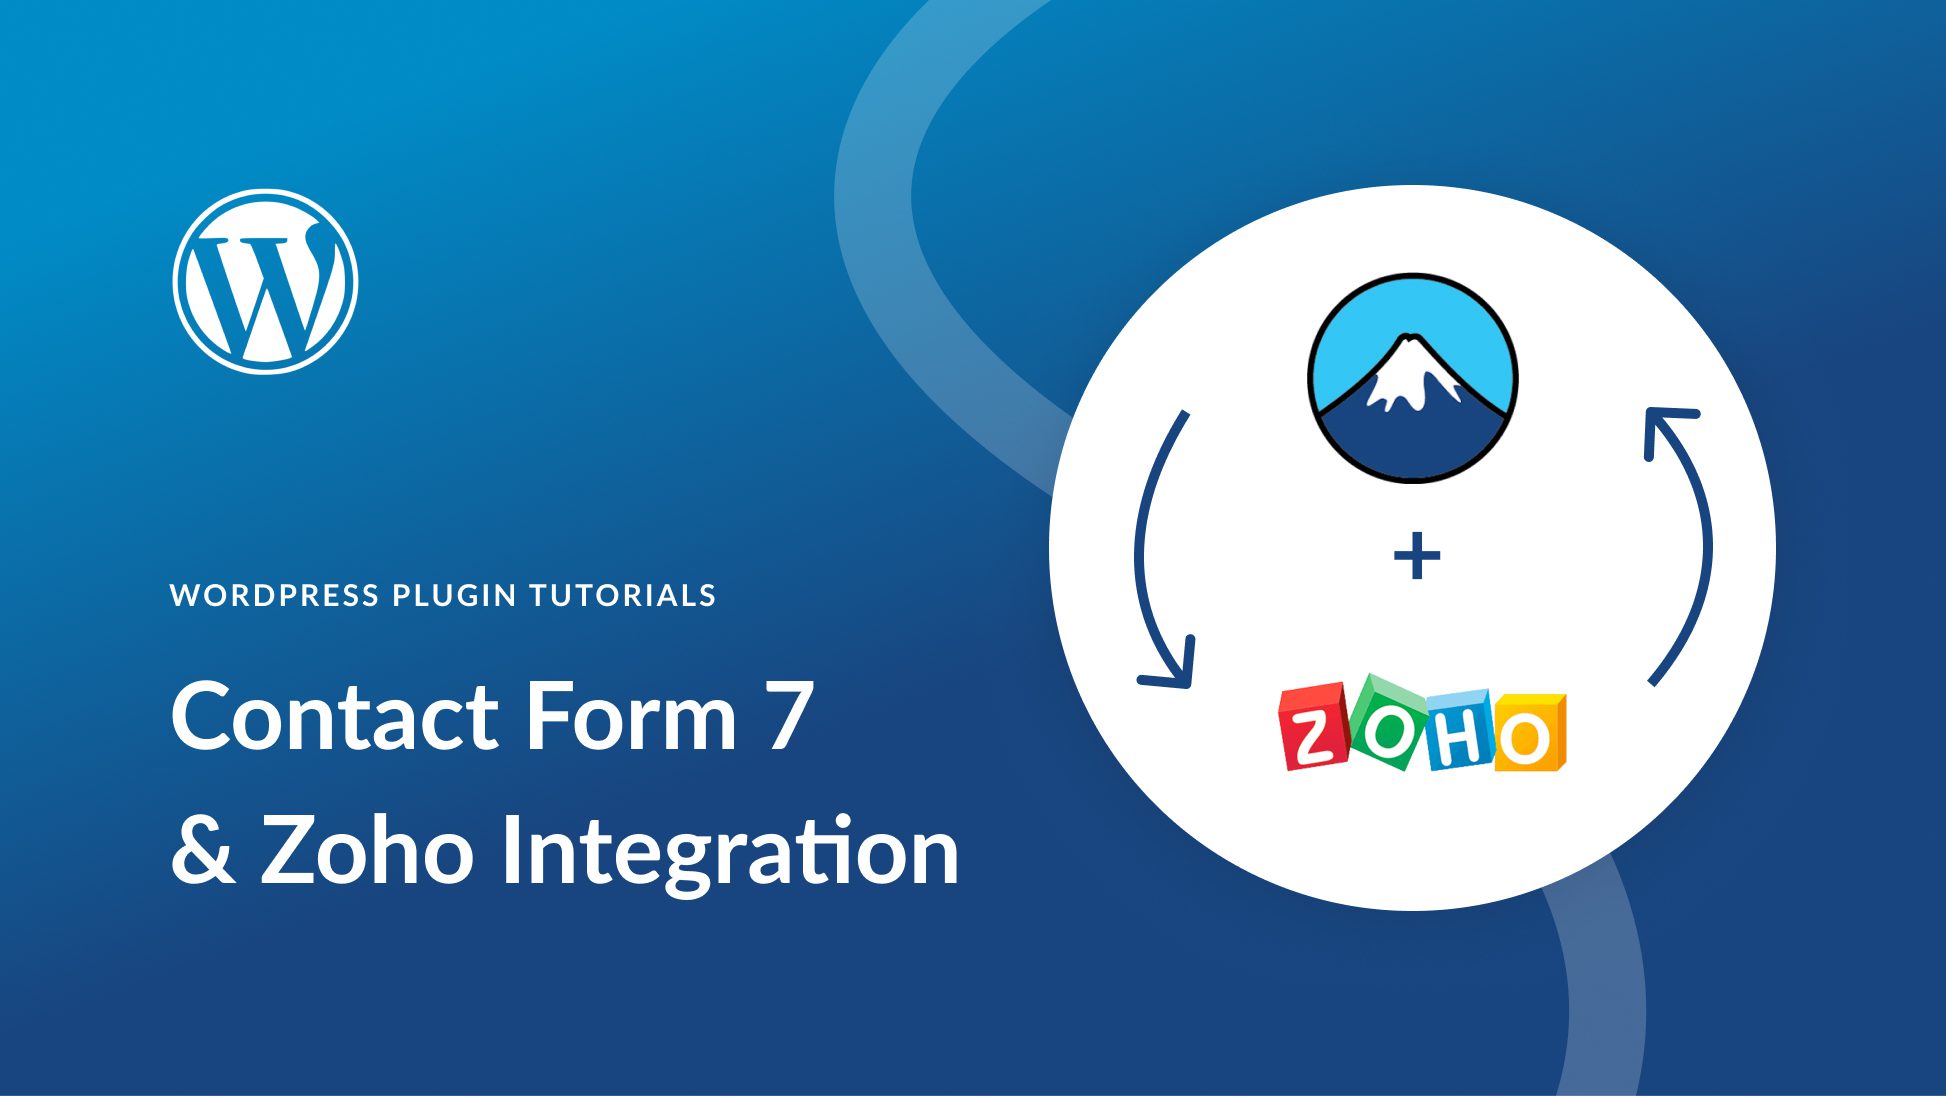 How to Integrate Contact Form 7 with Zoho CRM